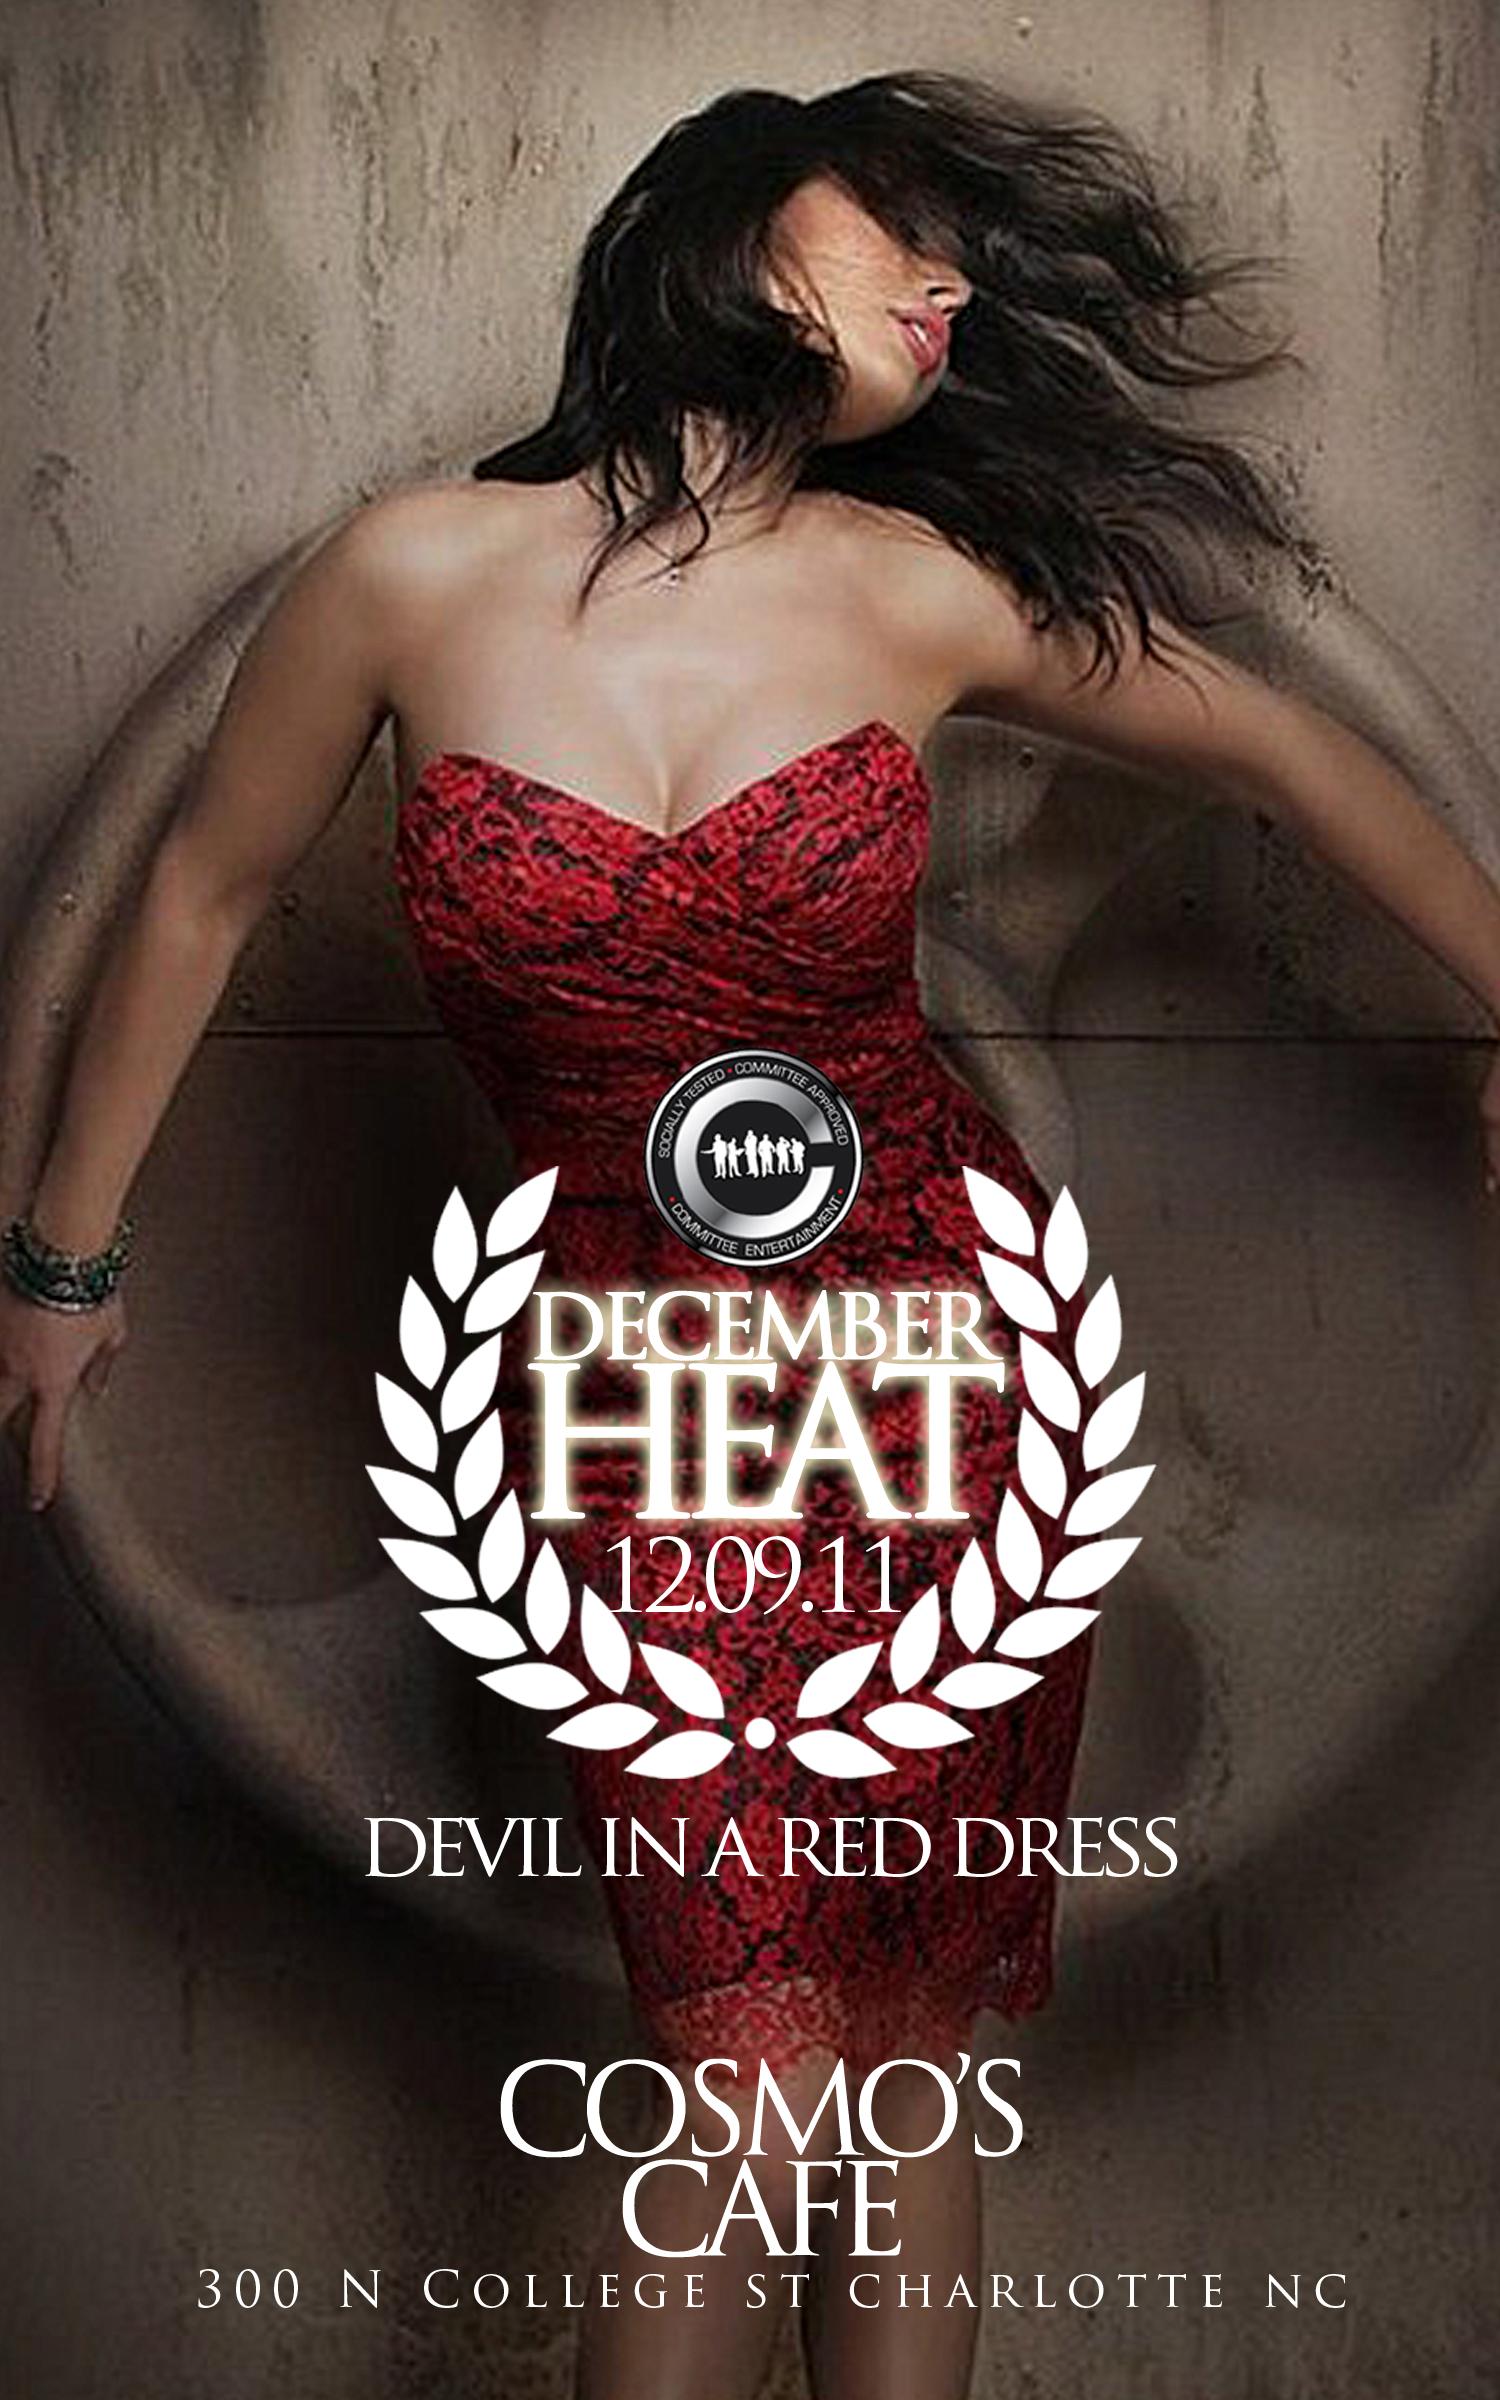 The Committee Presents: December HEAT “Devil in a RED Dress”